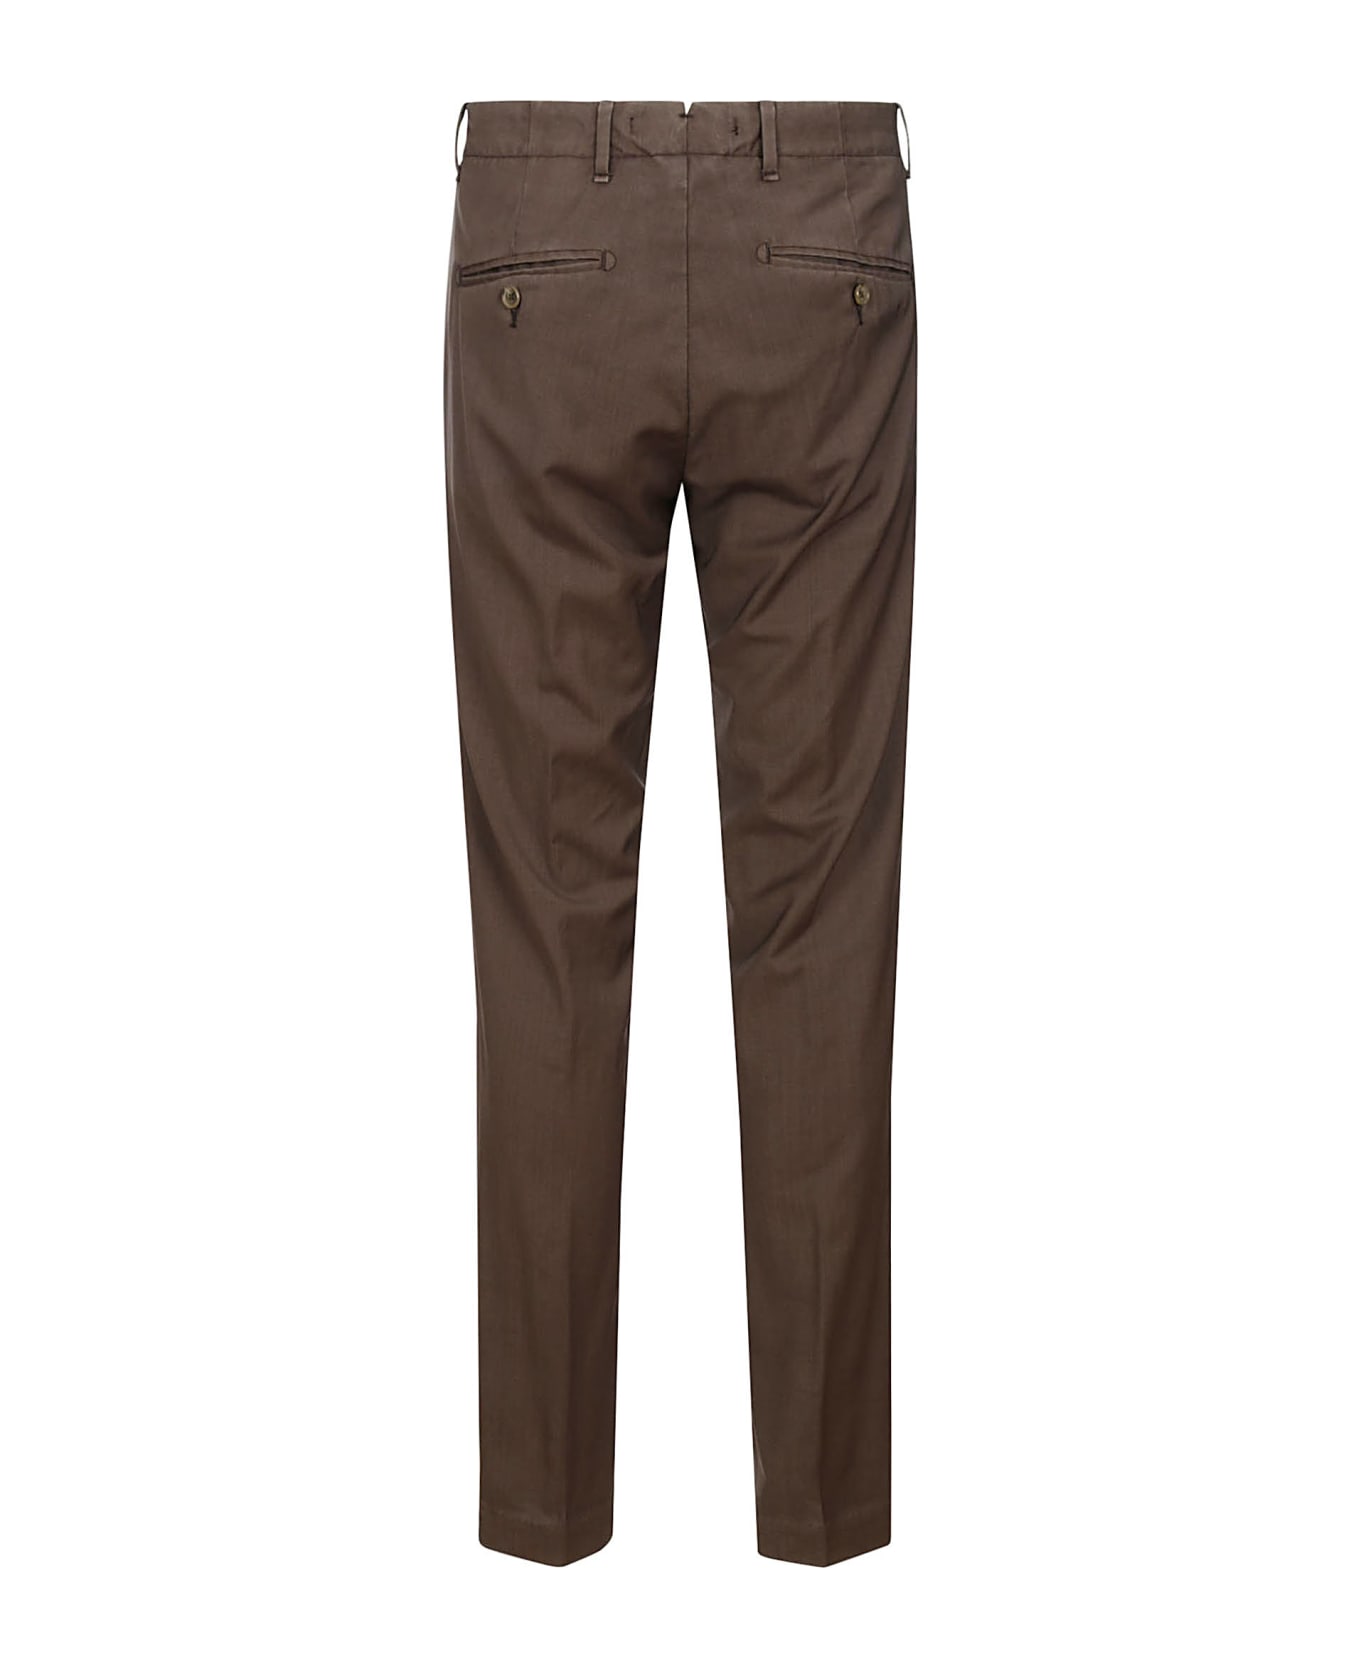 Myths Trousers - Brown ボトムス